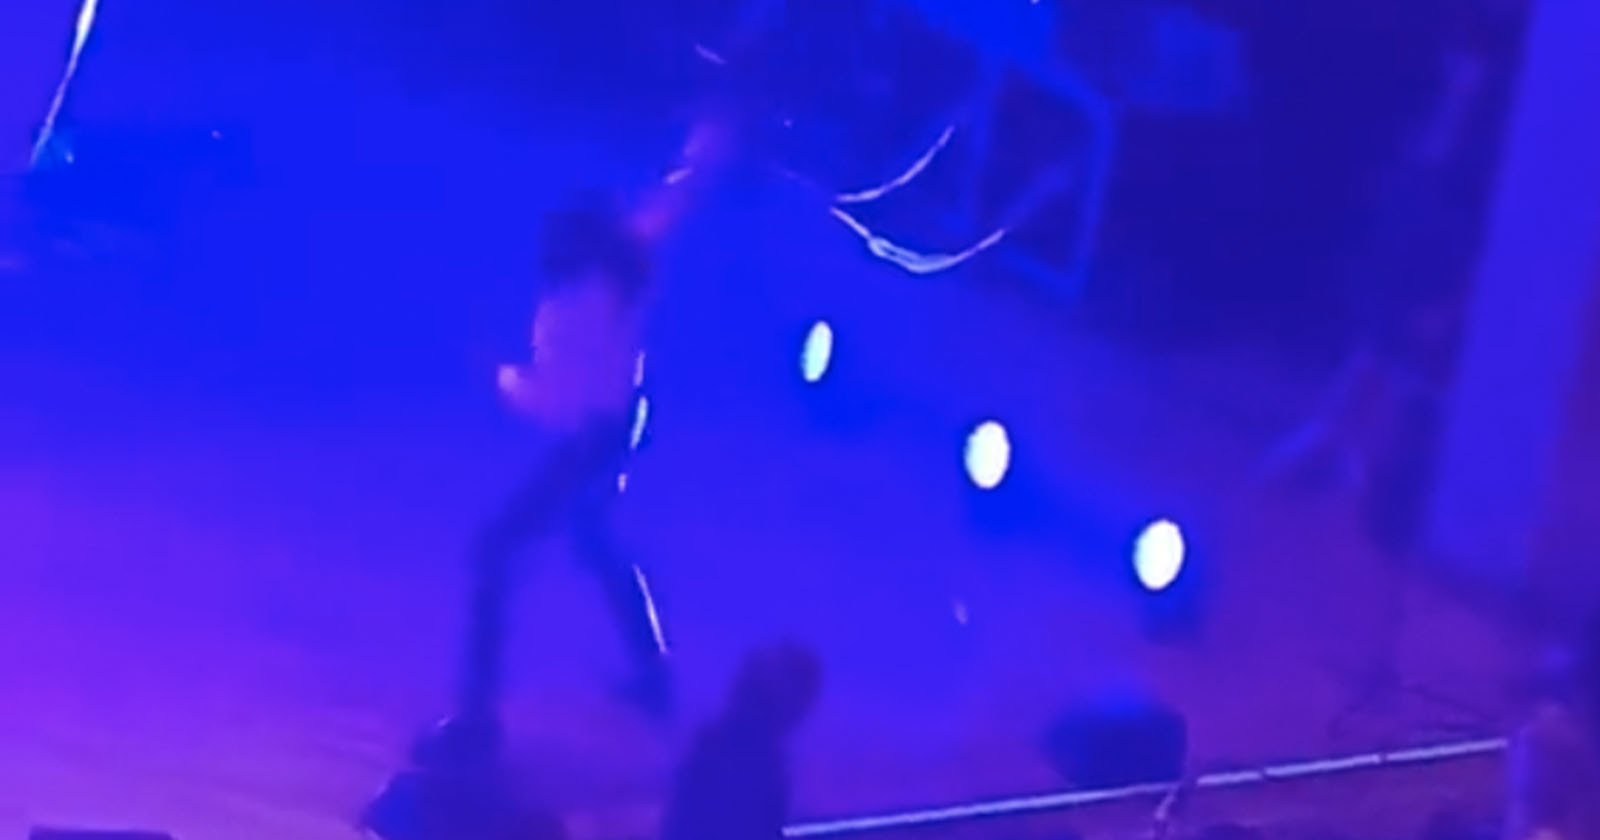  singer steve lacy smashes camera after fan throws 